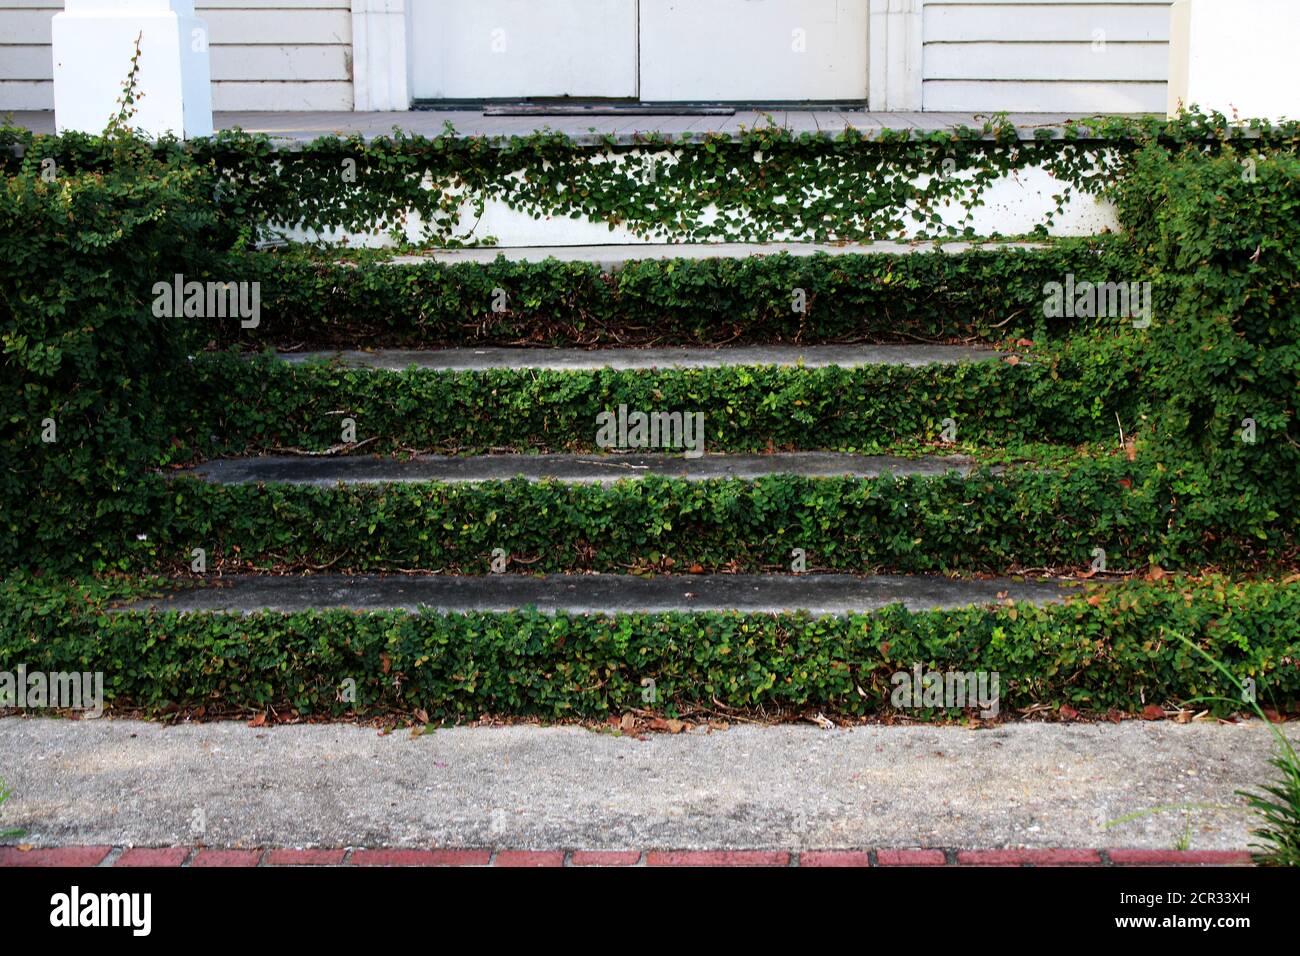 old cement steps overgrown with green leafy vines Stock Photo